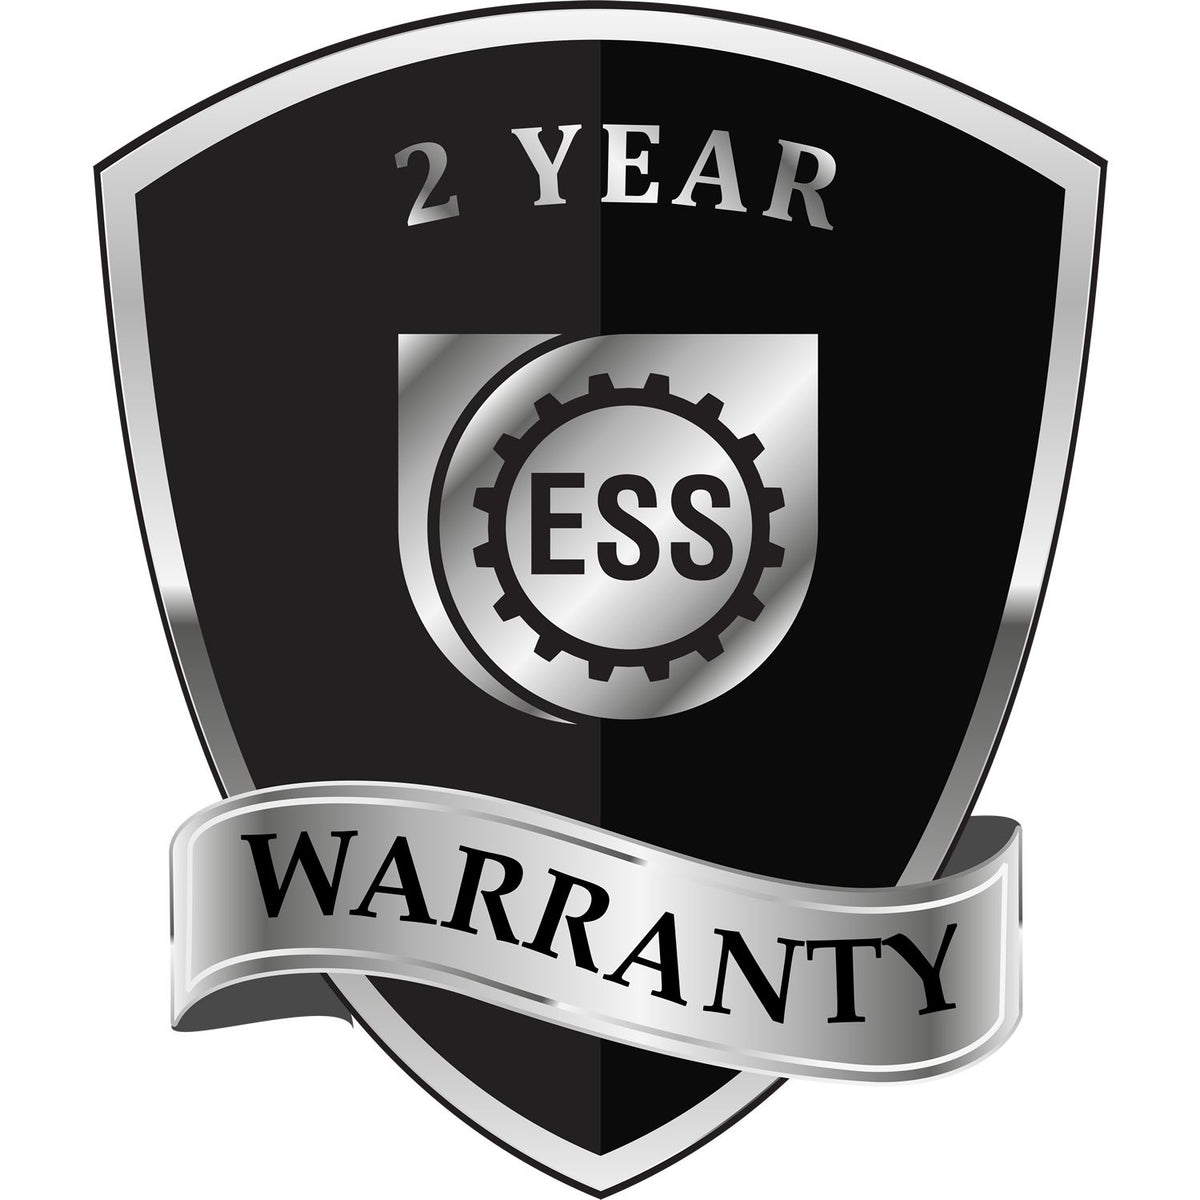 A badge or emblem showing a warranty icon for the State of Arizona Long Reach Architectural Embossing Seal